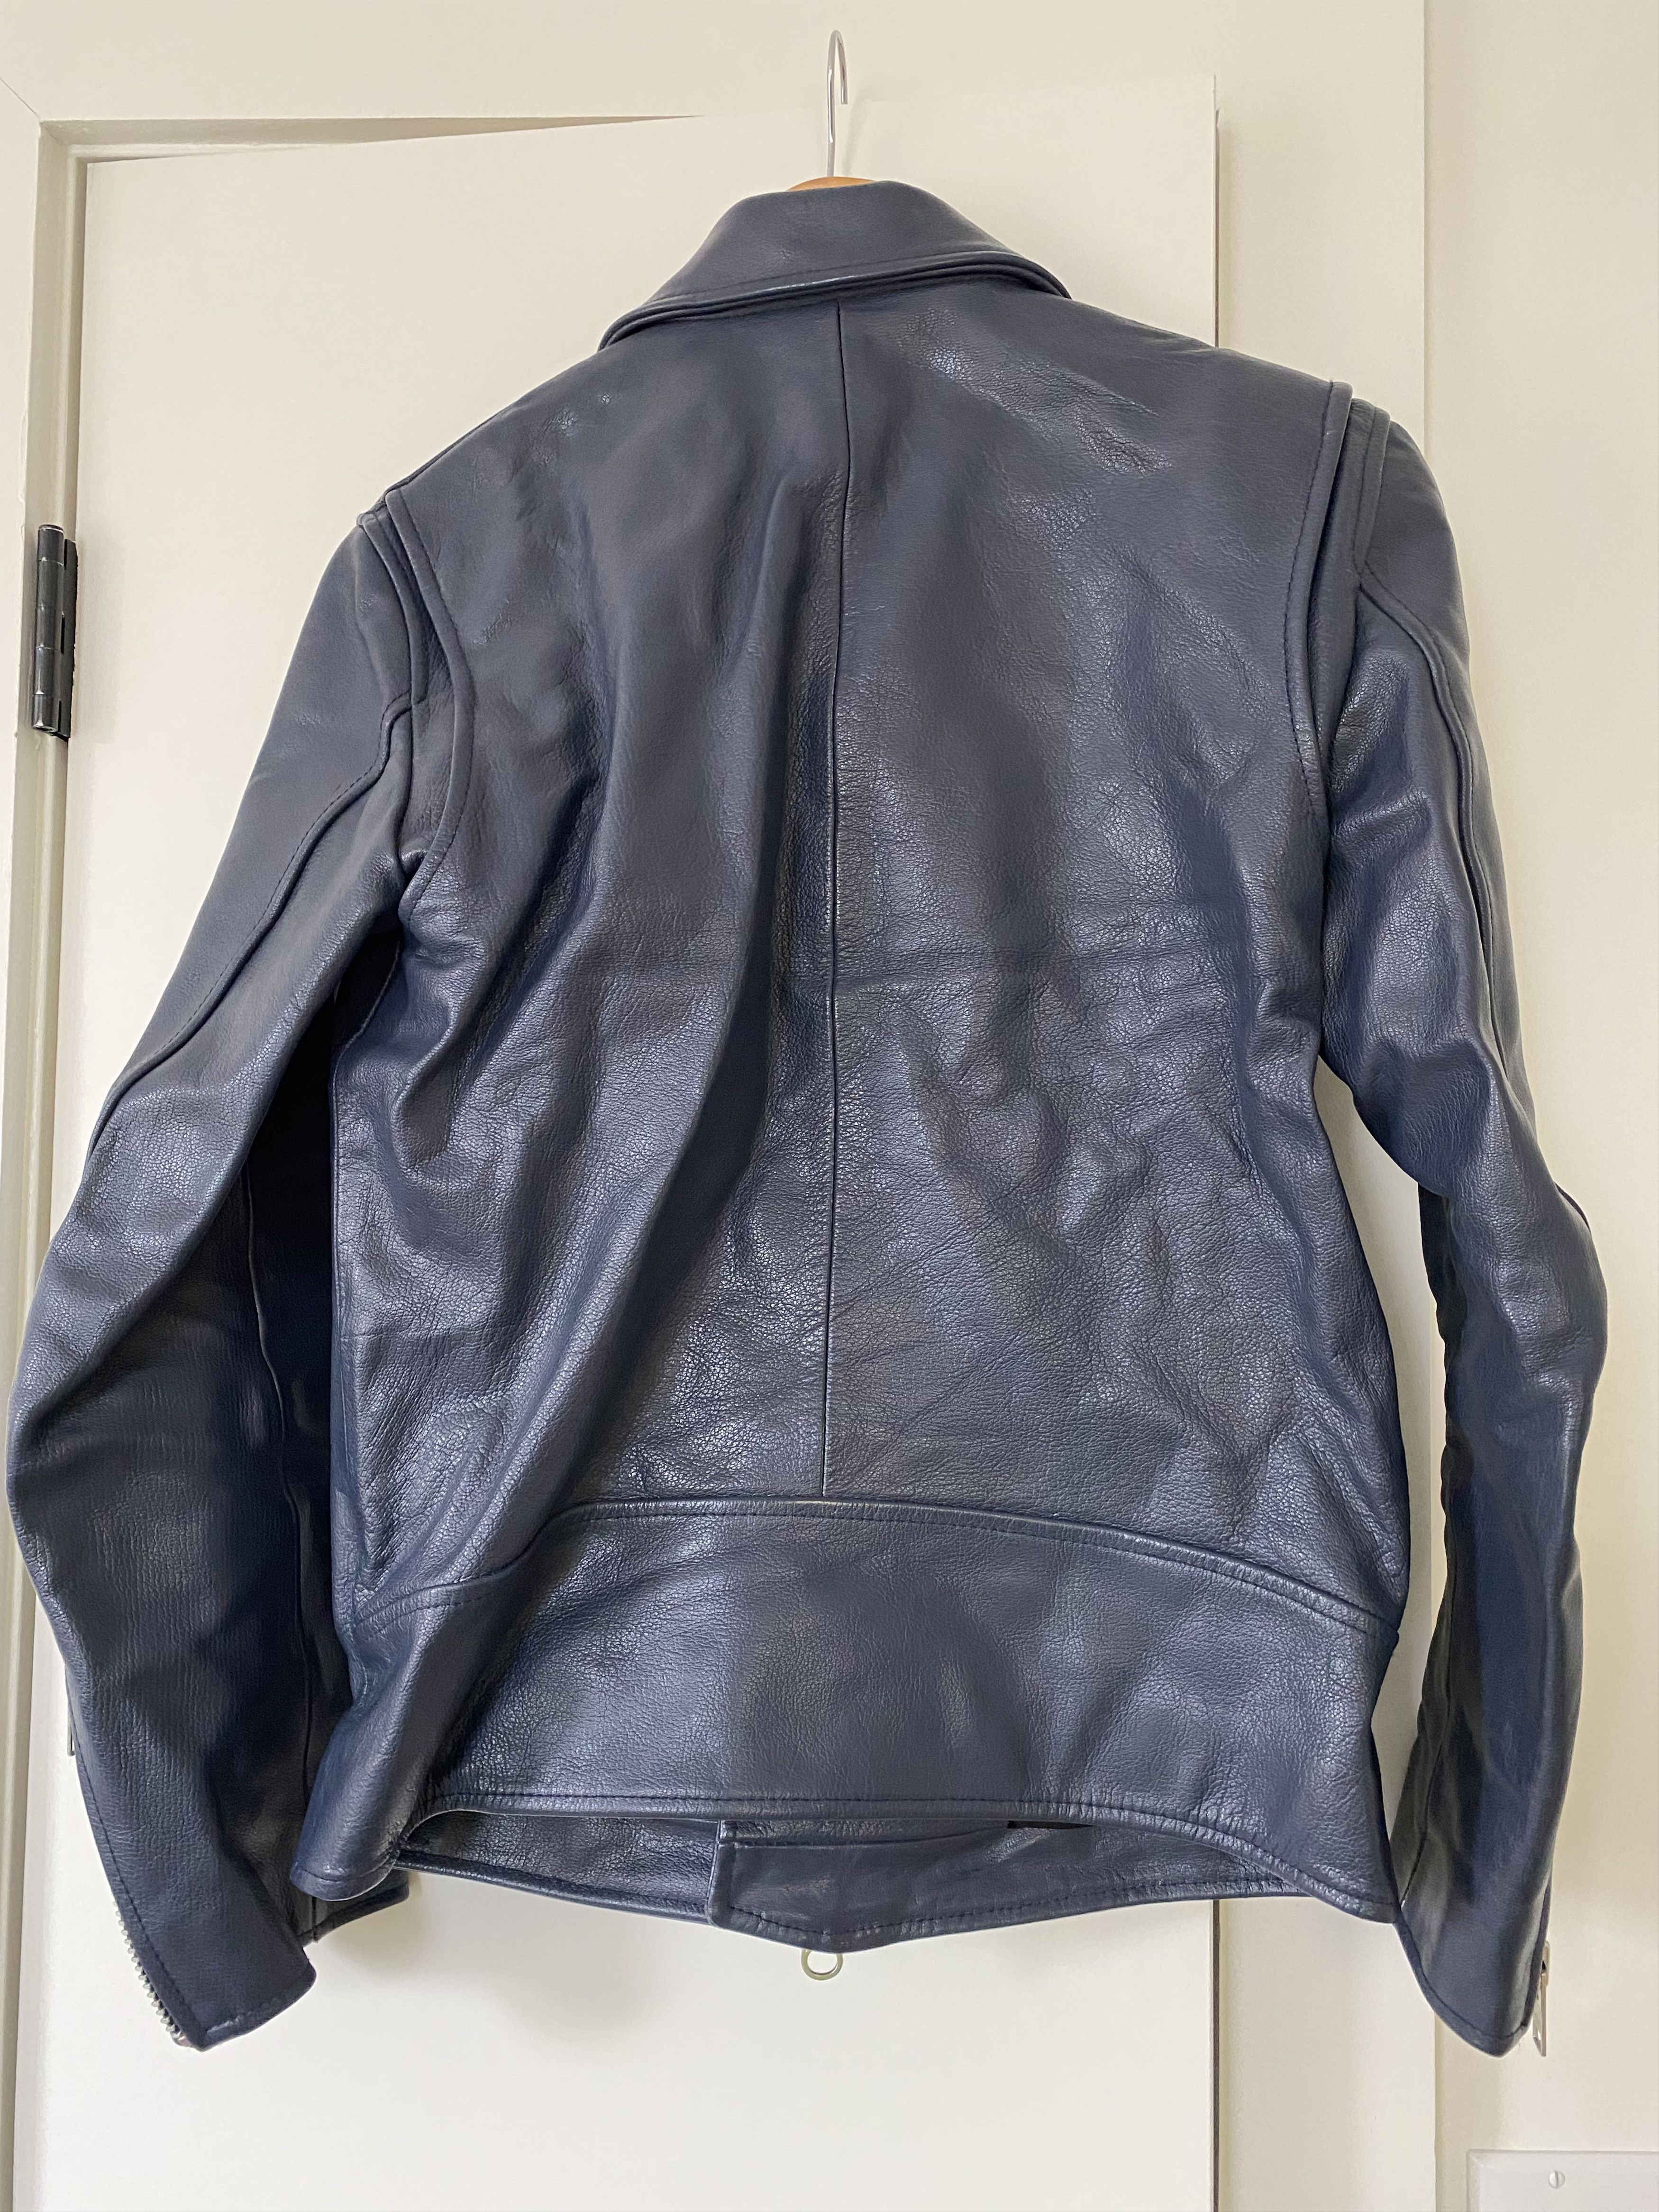 Temple Of Jawnz Double Rider Leather Jacket DR3 Navy Goatskin - Stock 45 Size US S / EU 44-46 / 1 - 2 Preview